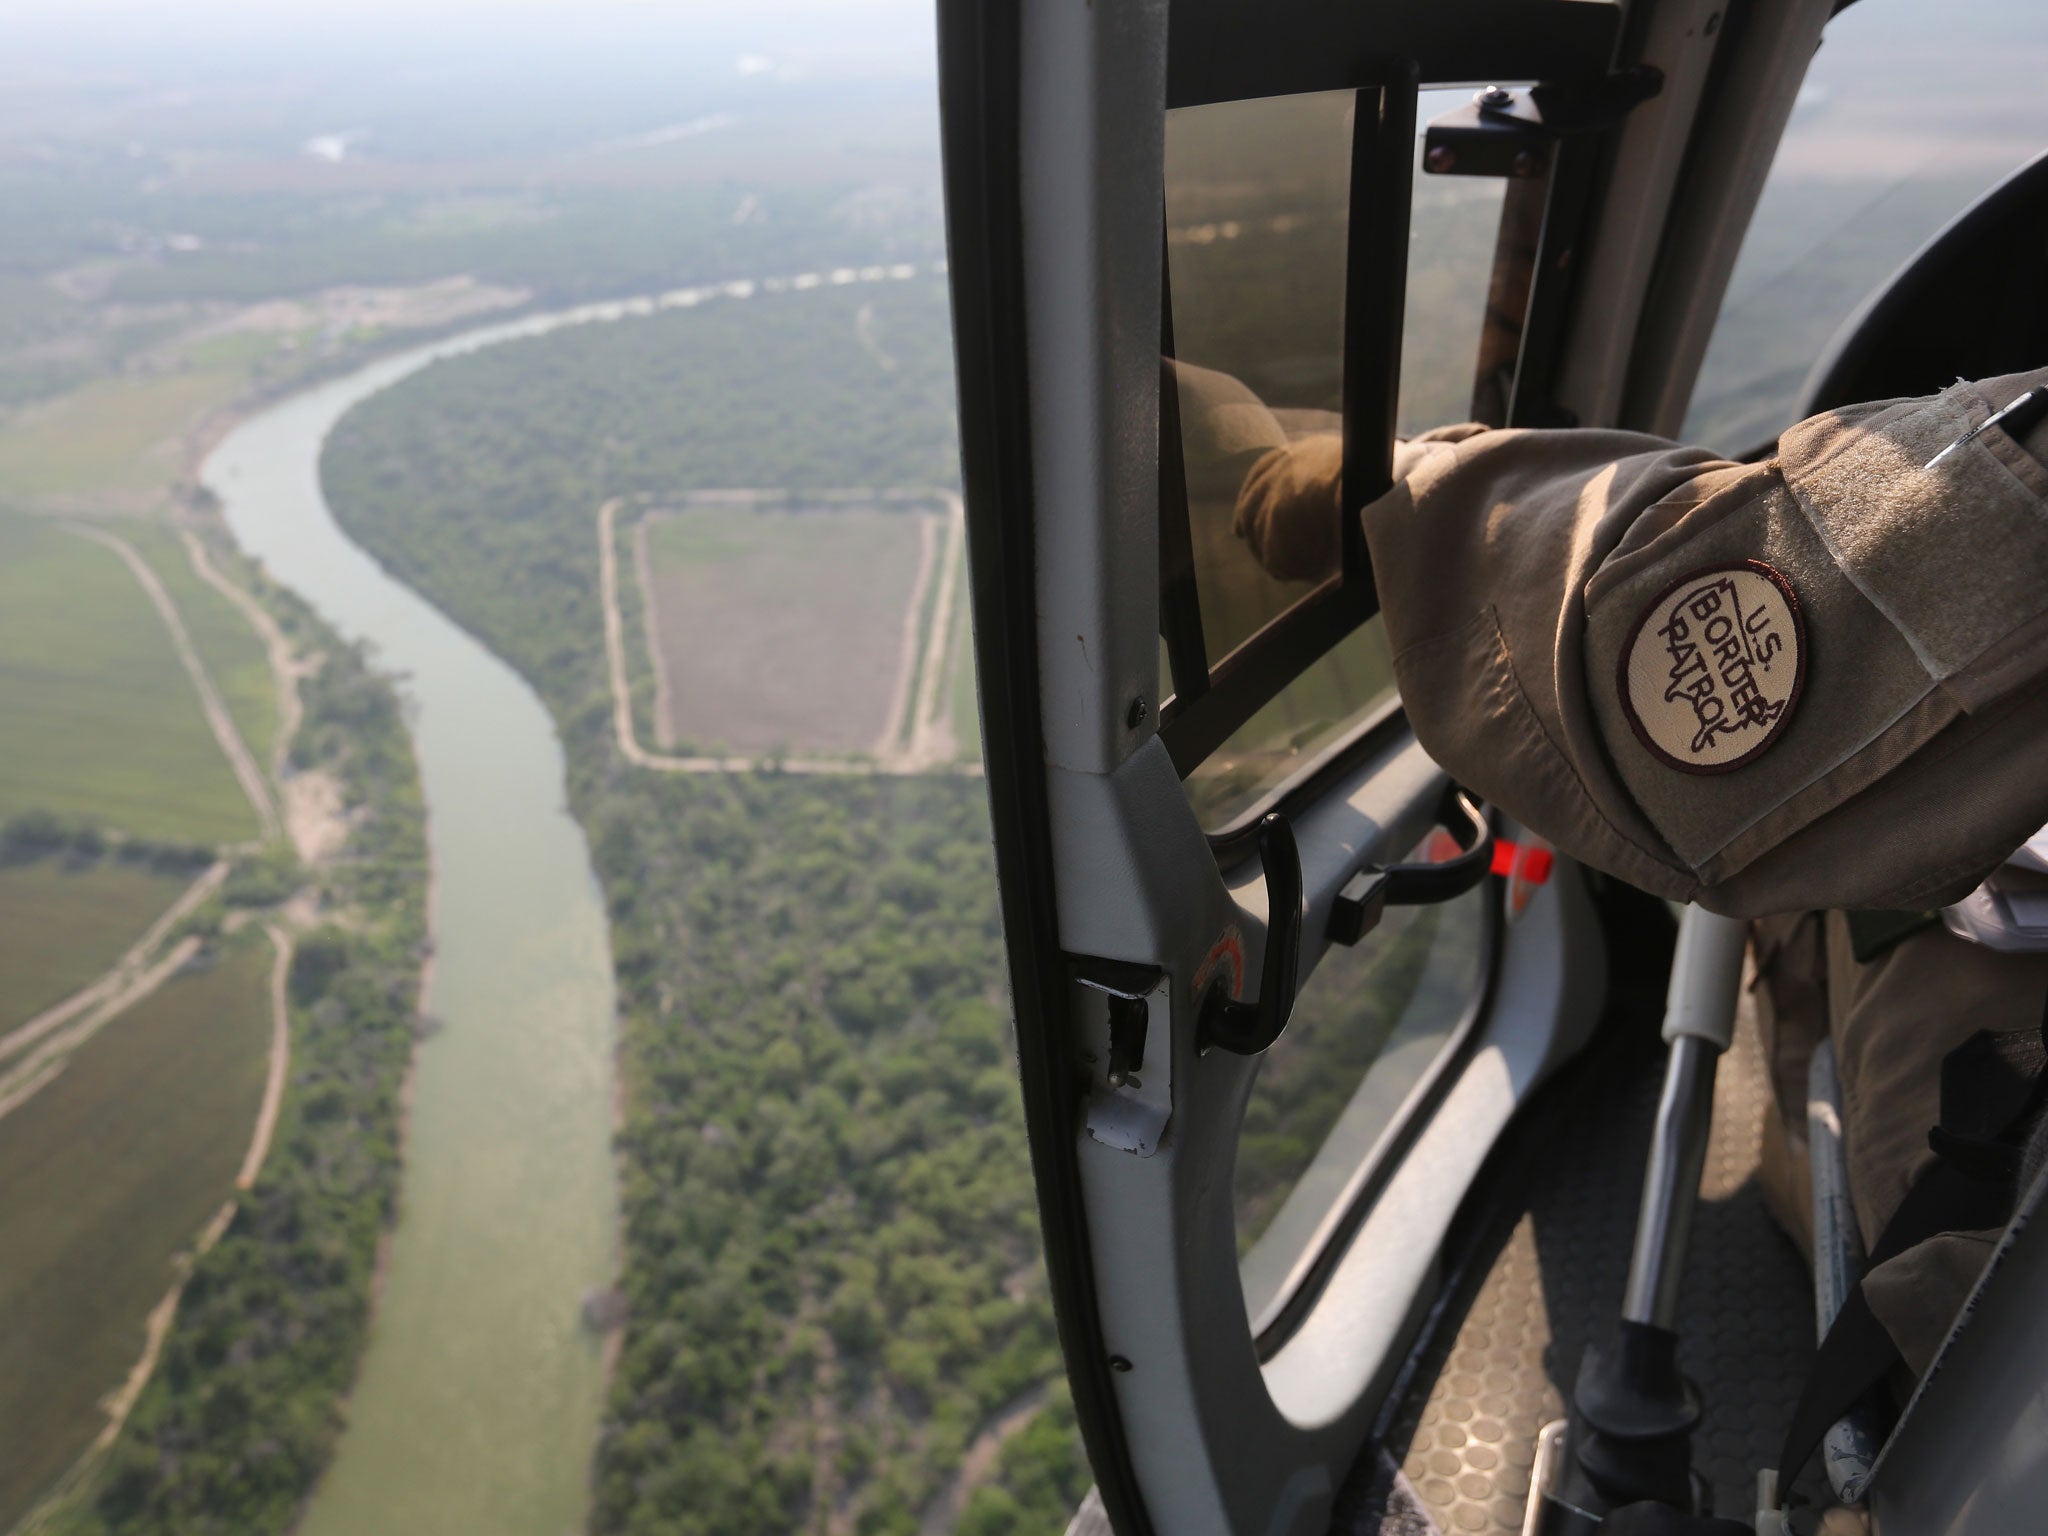 The Rio Grande Valley area in Texas has become the busiest sector for illegal immigration